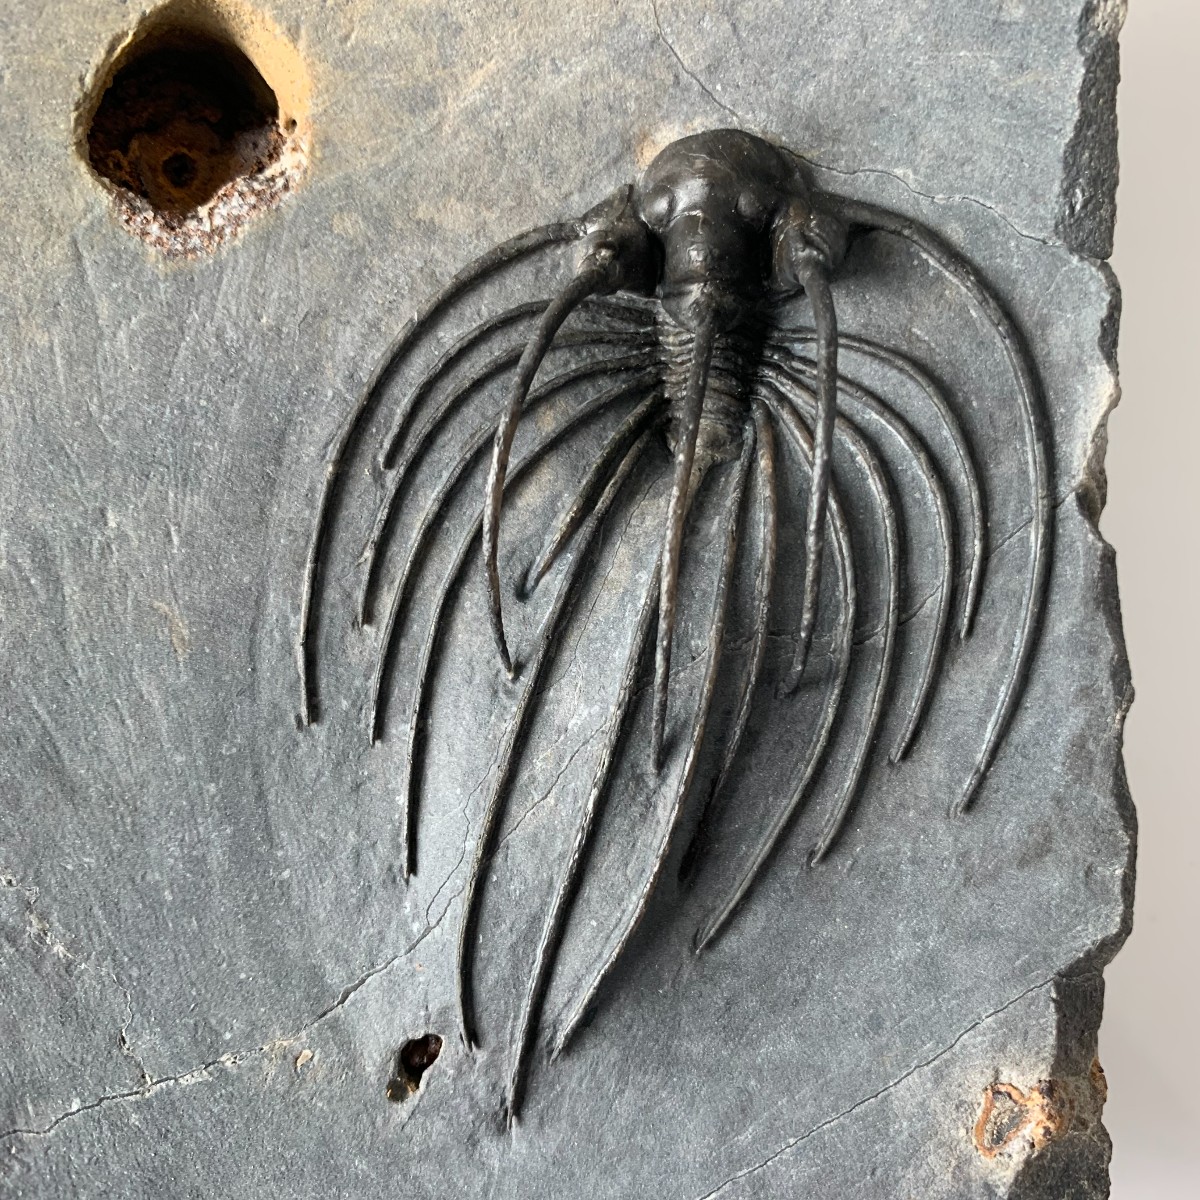 It’s #TrilobiteTuesday! Meet Heliopeltis, one of Morocco’s strangest Devonian trilobites. This 400-million-year-old critter had a small body, large eyes, and long spines. Scientists think its unusual body design indicates that this species floated on gentle ocean currents.